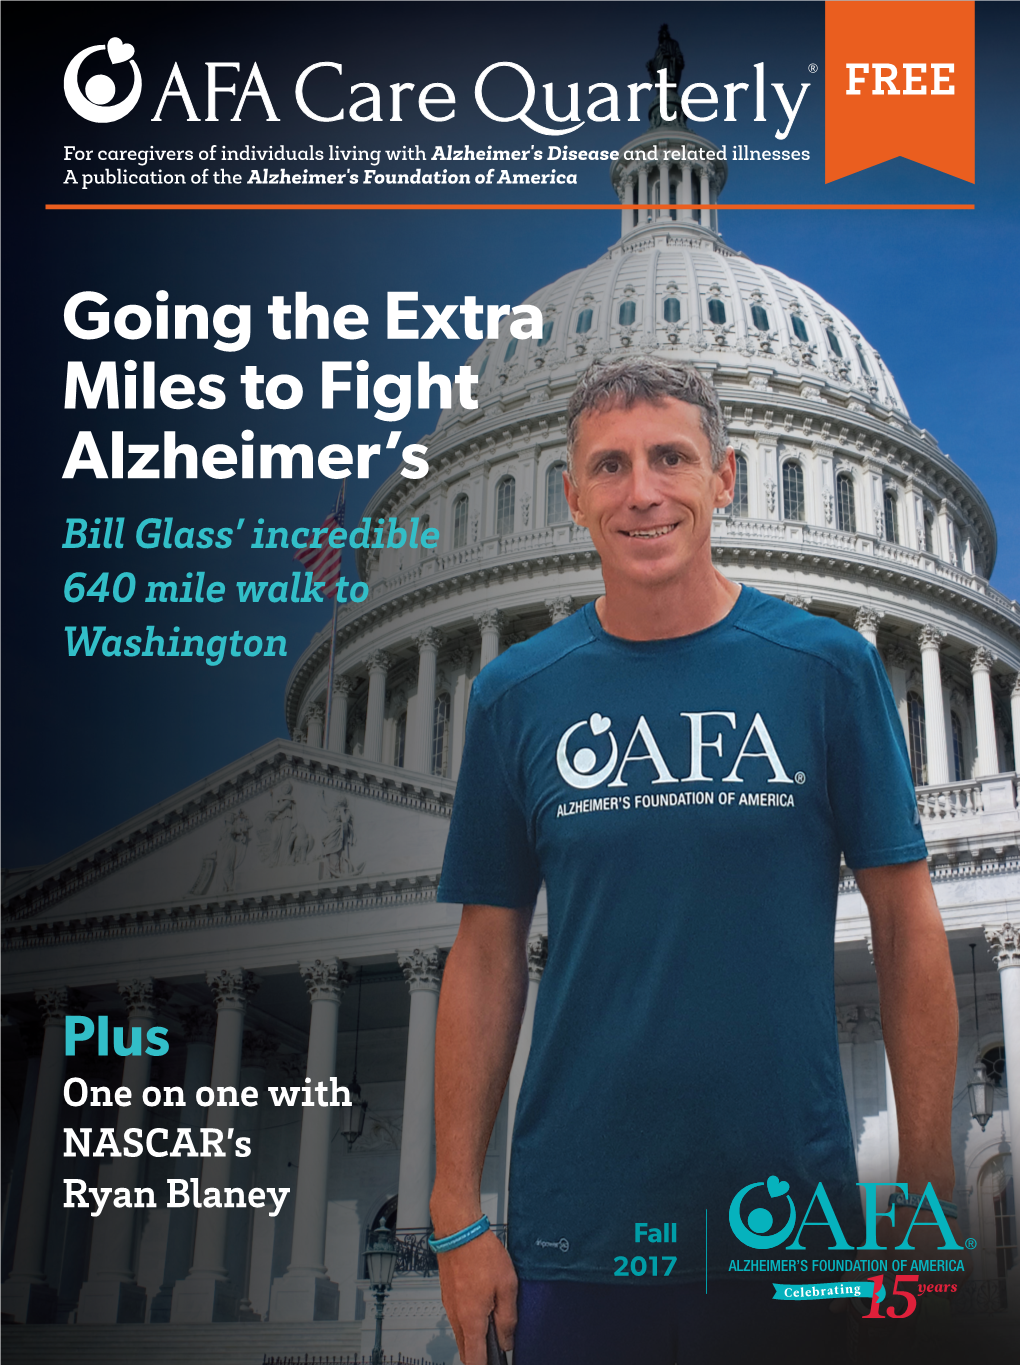 Going the Extra Miles to Fight Alzheimer's